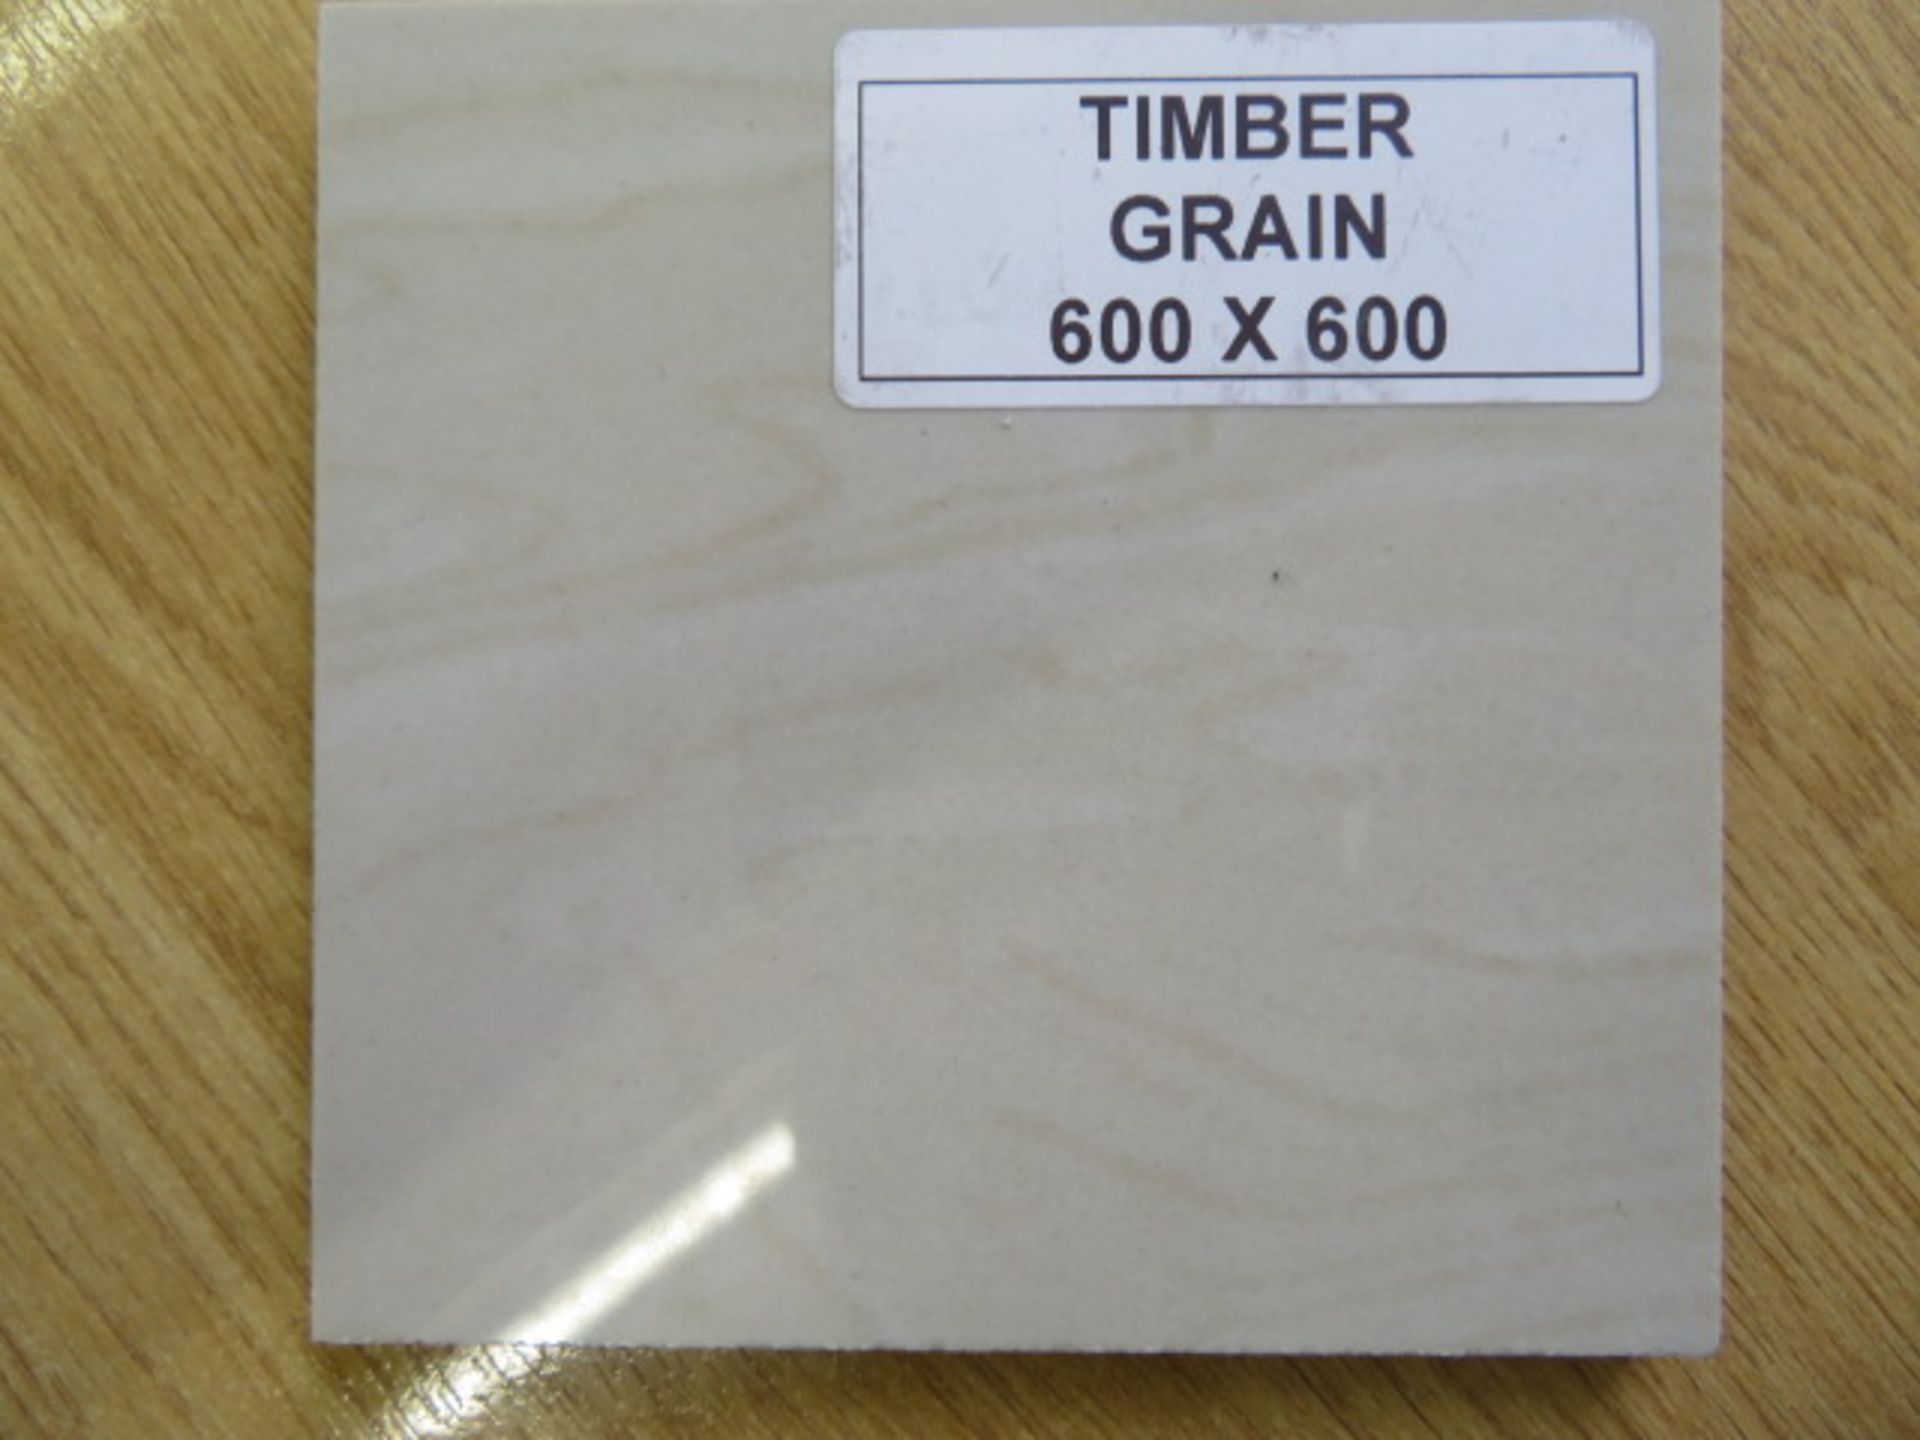 NEW 8.64m2 Timber Grain Wall and Floor Tiles. 600x600mm per tile. 10mm thick. This series is... - Image 2 of 2